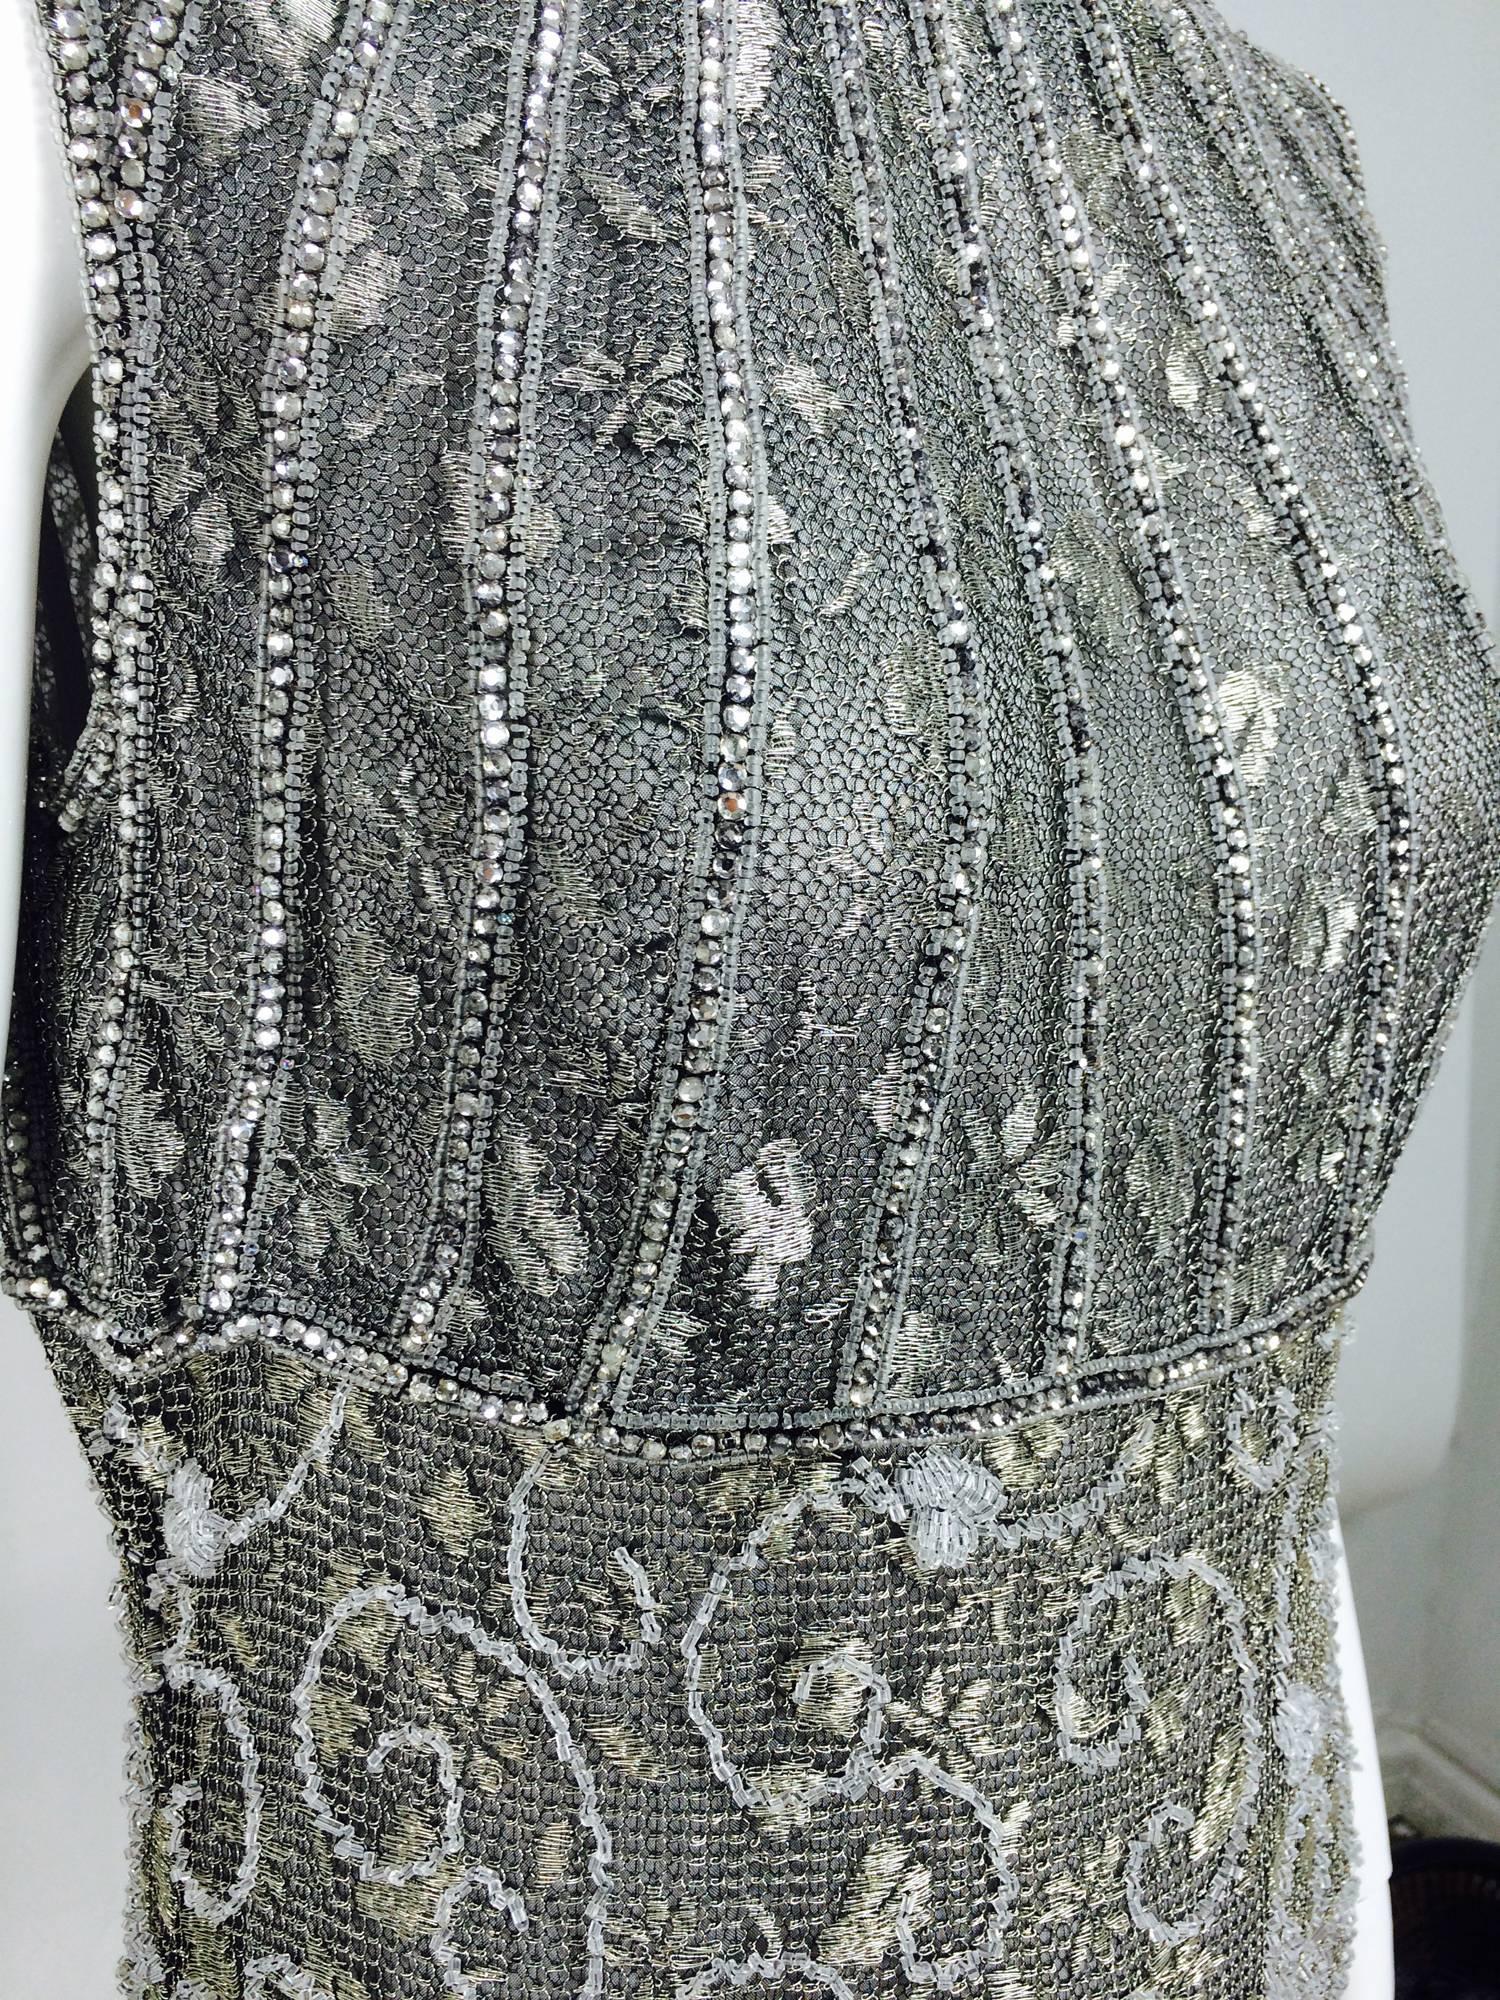 Badgley Mischka embroidered & beaded silver metallic lace gown 2